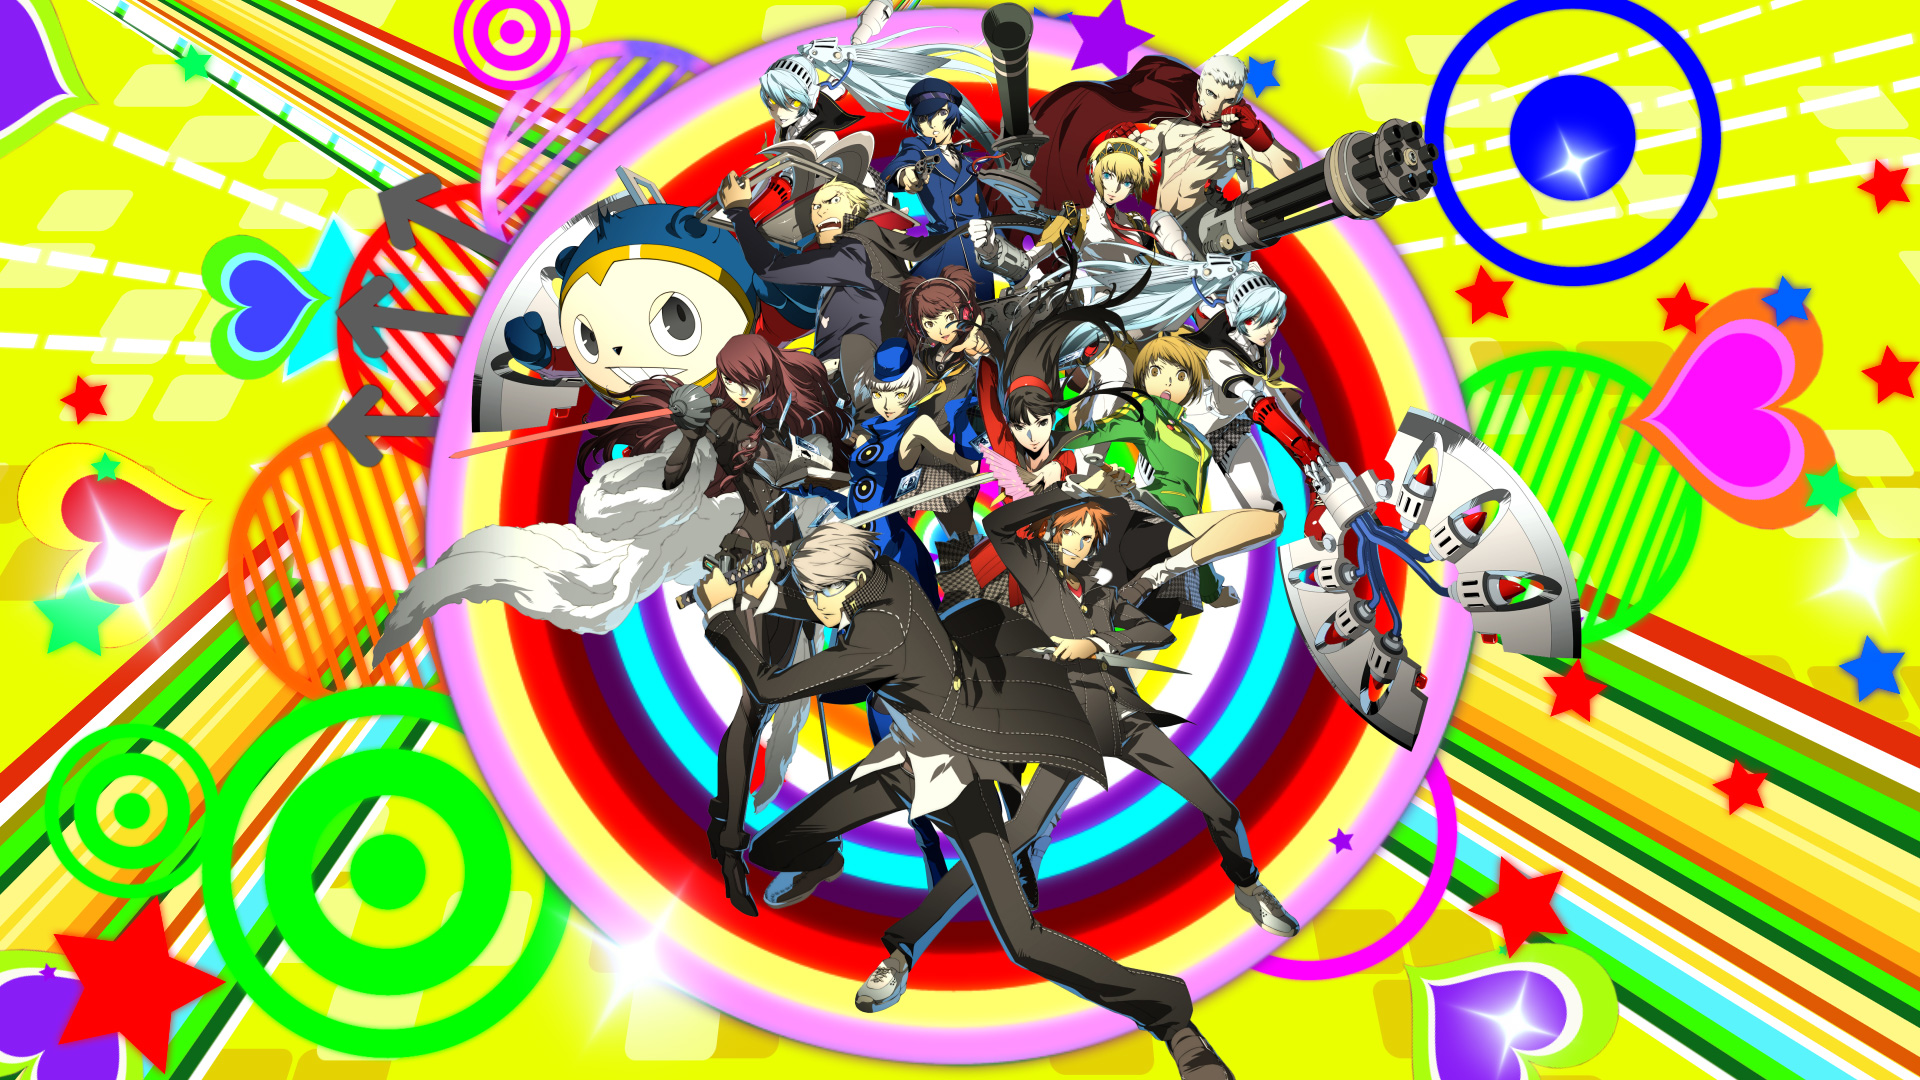 Free Download Persona 3 Wallpaper Widescreen Wwwhigh Definition Images, Photos, Reviews